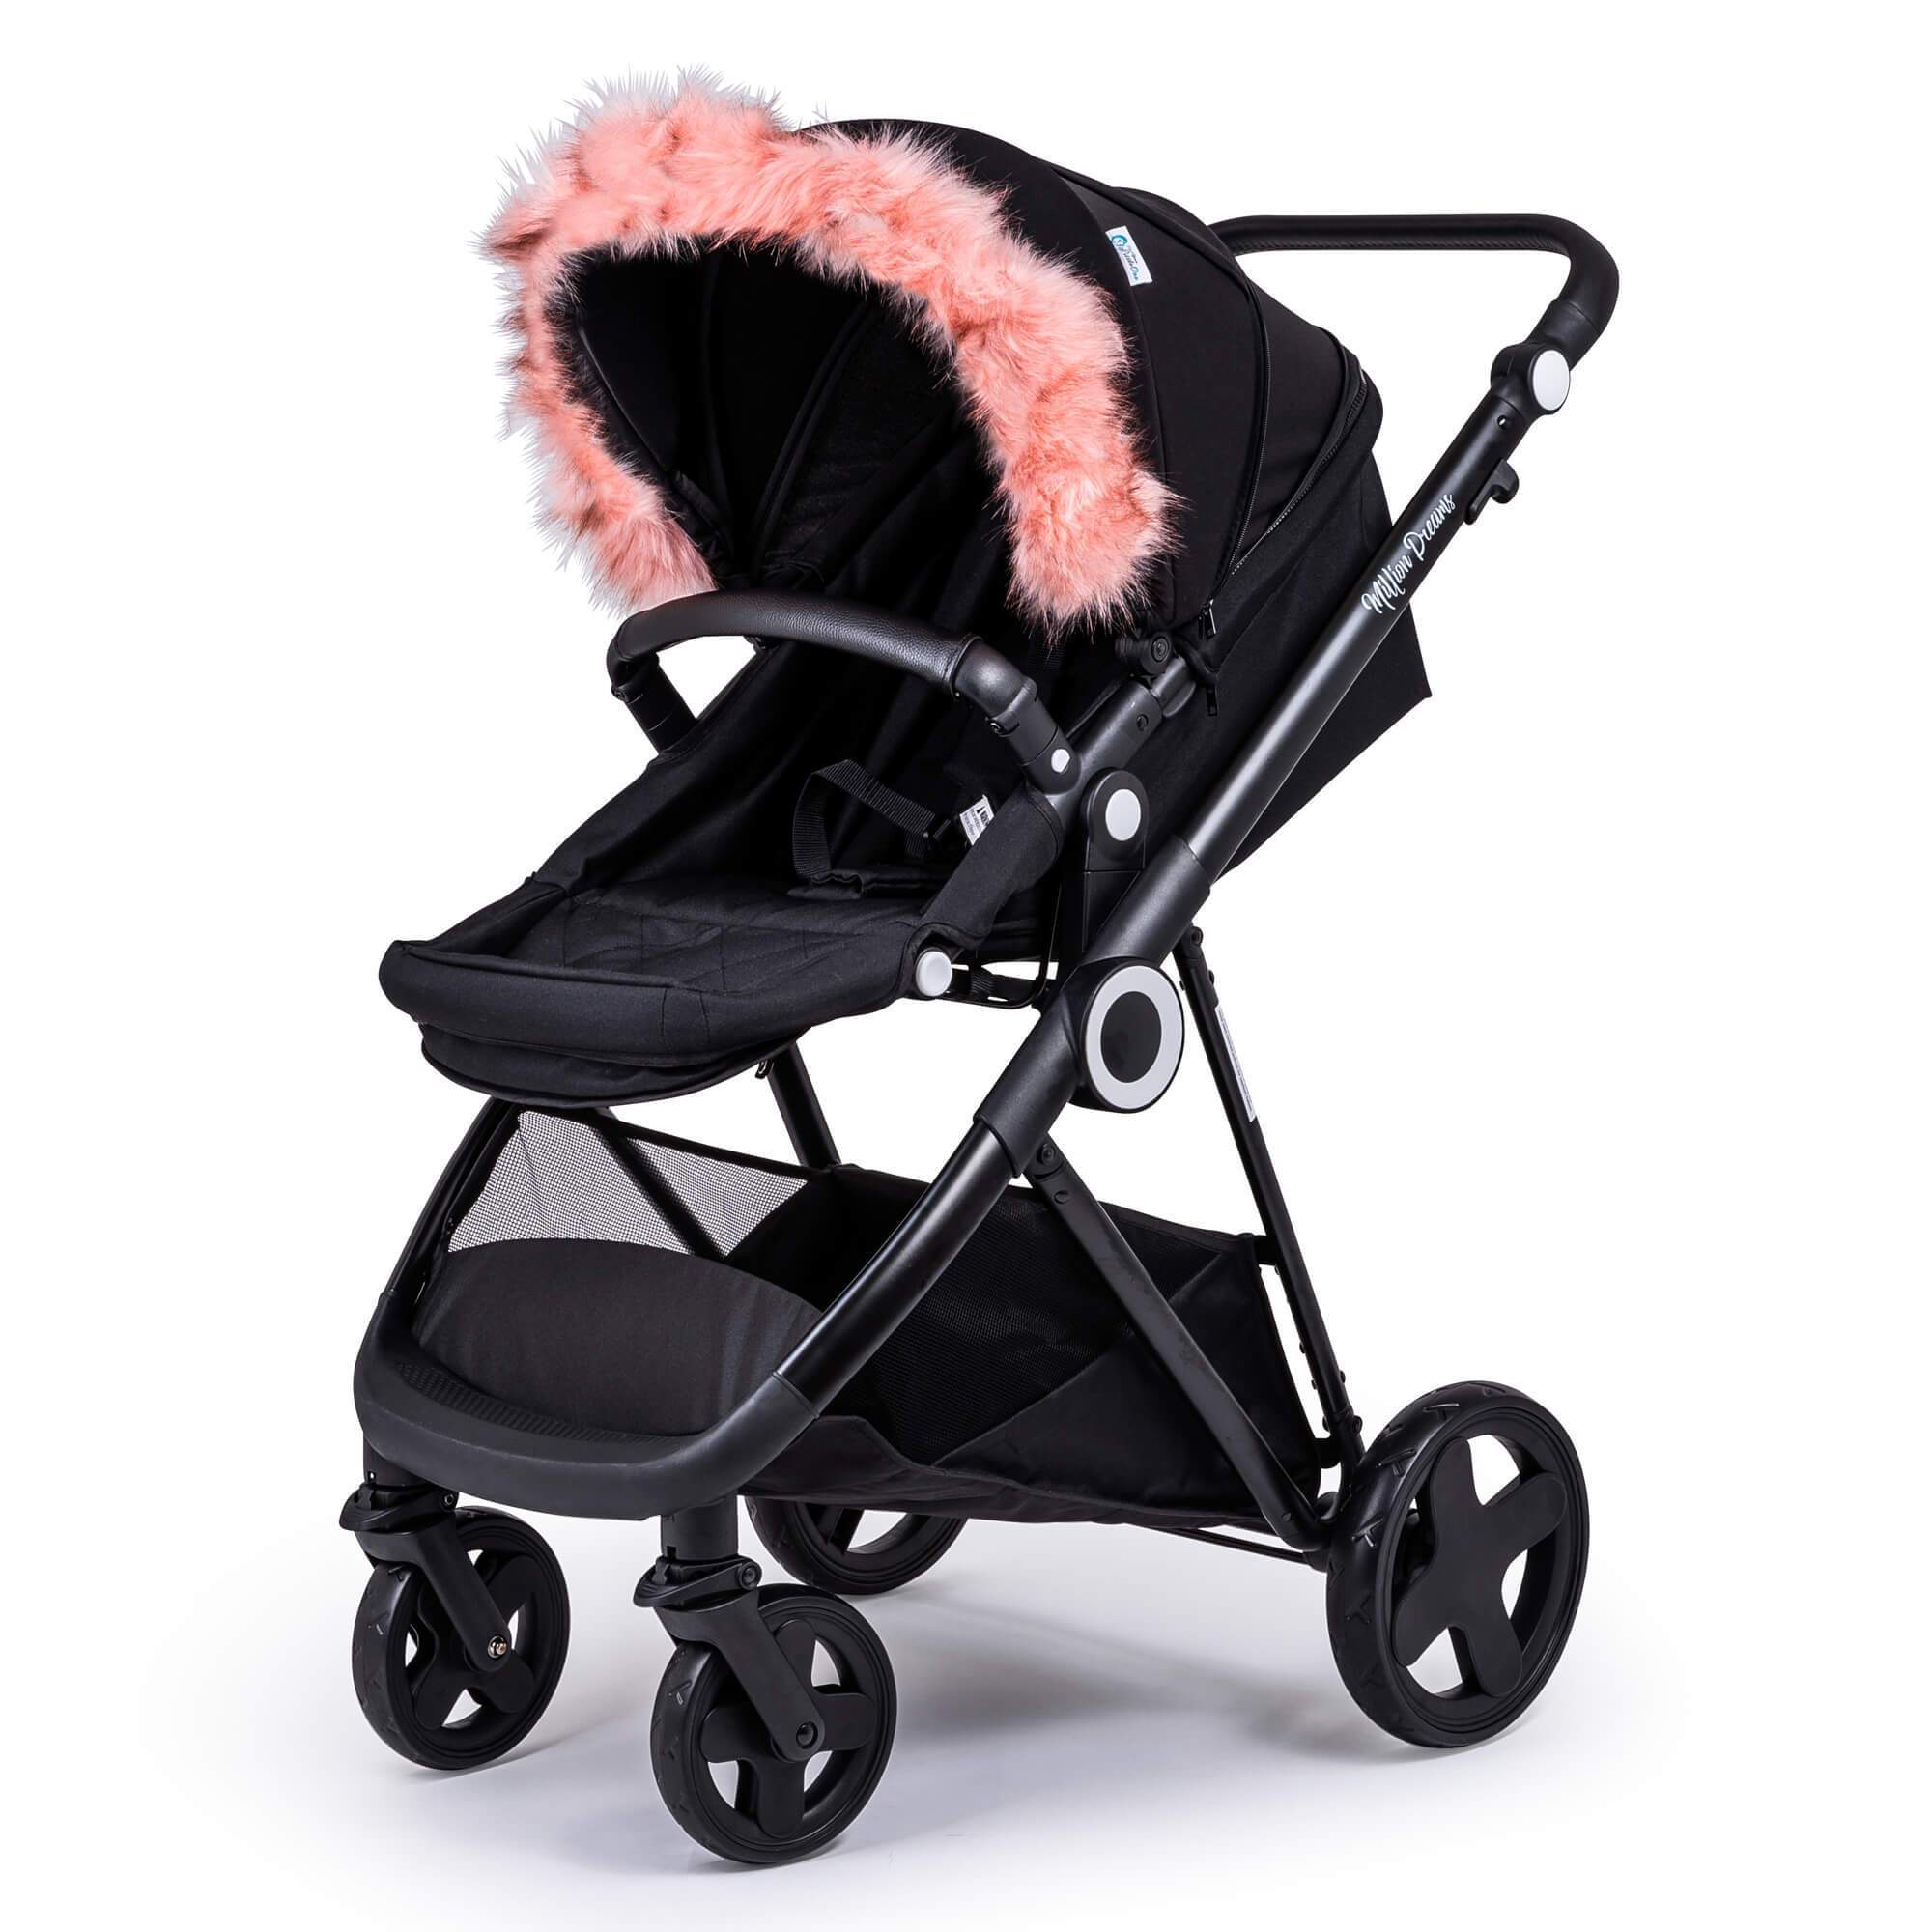 Pram Fur Hood Trim Attachment for Pushchair Compatible with Stokke - For Your Little One